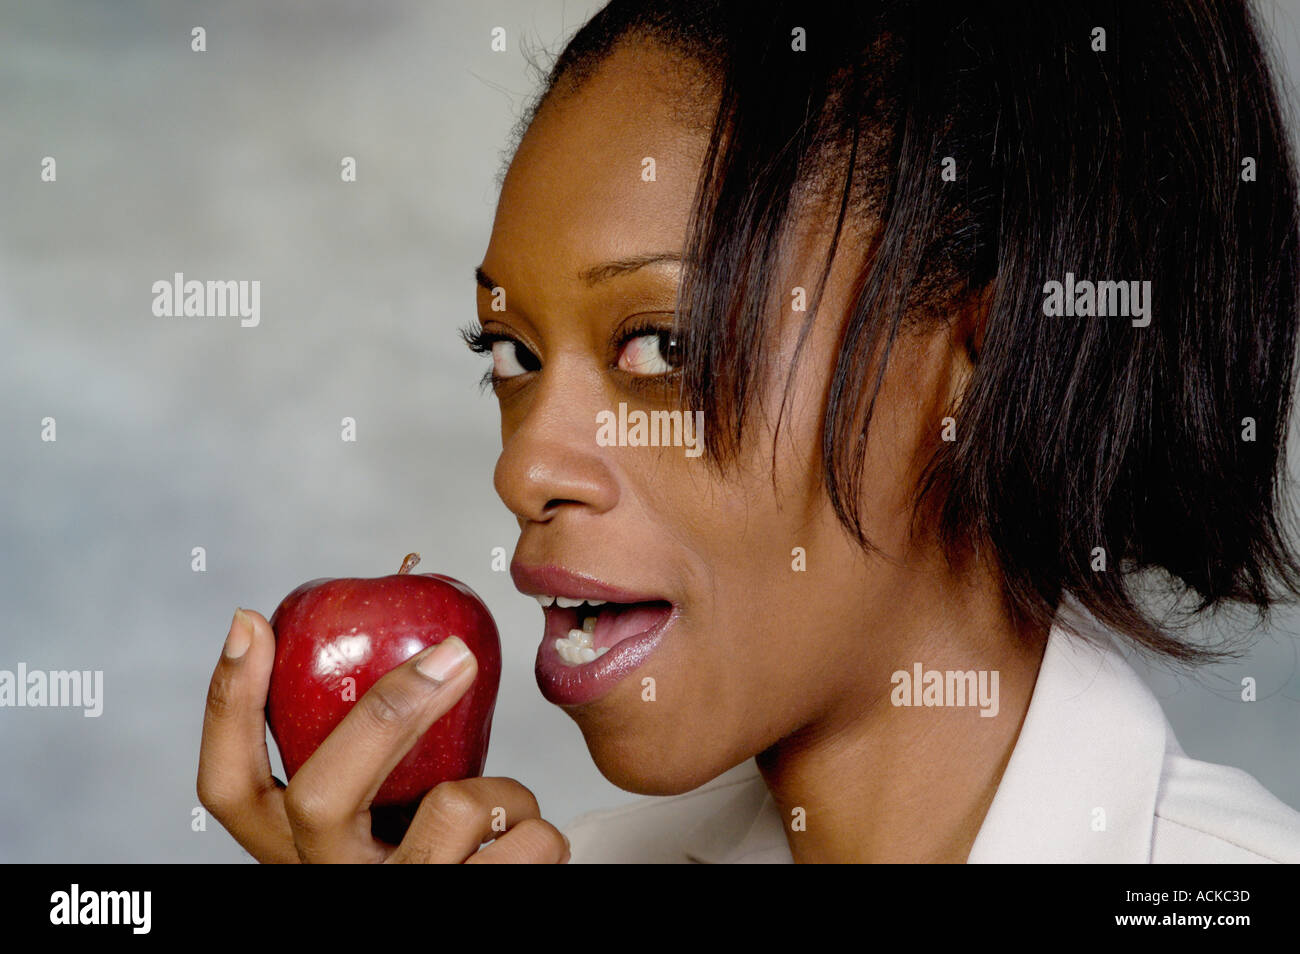 Woman holding an apple Stock Photo